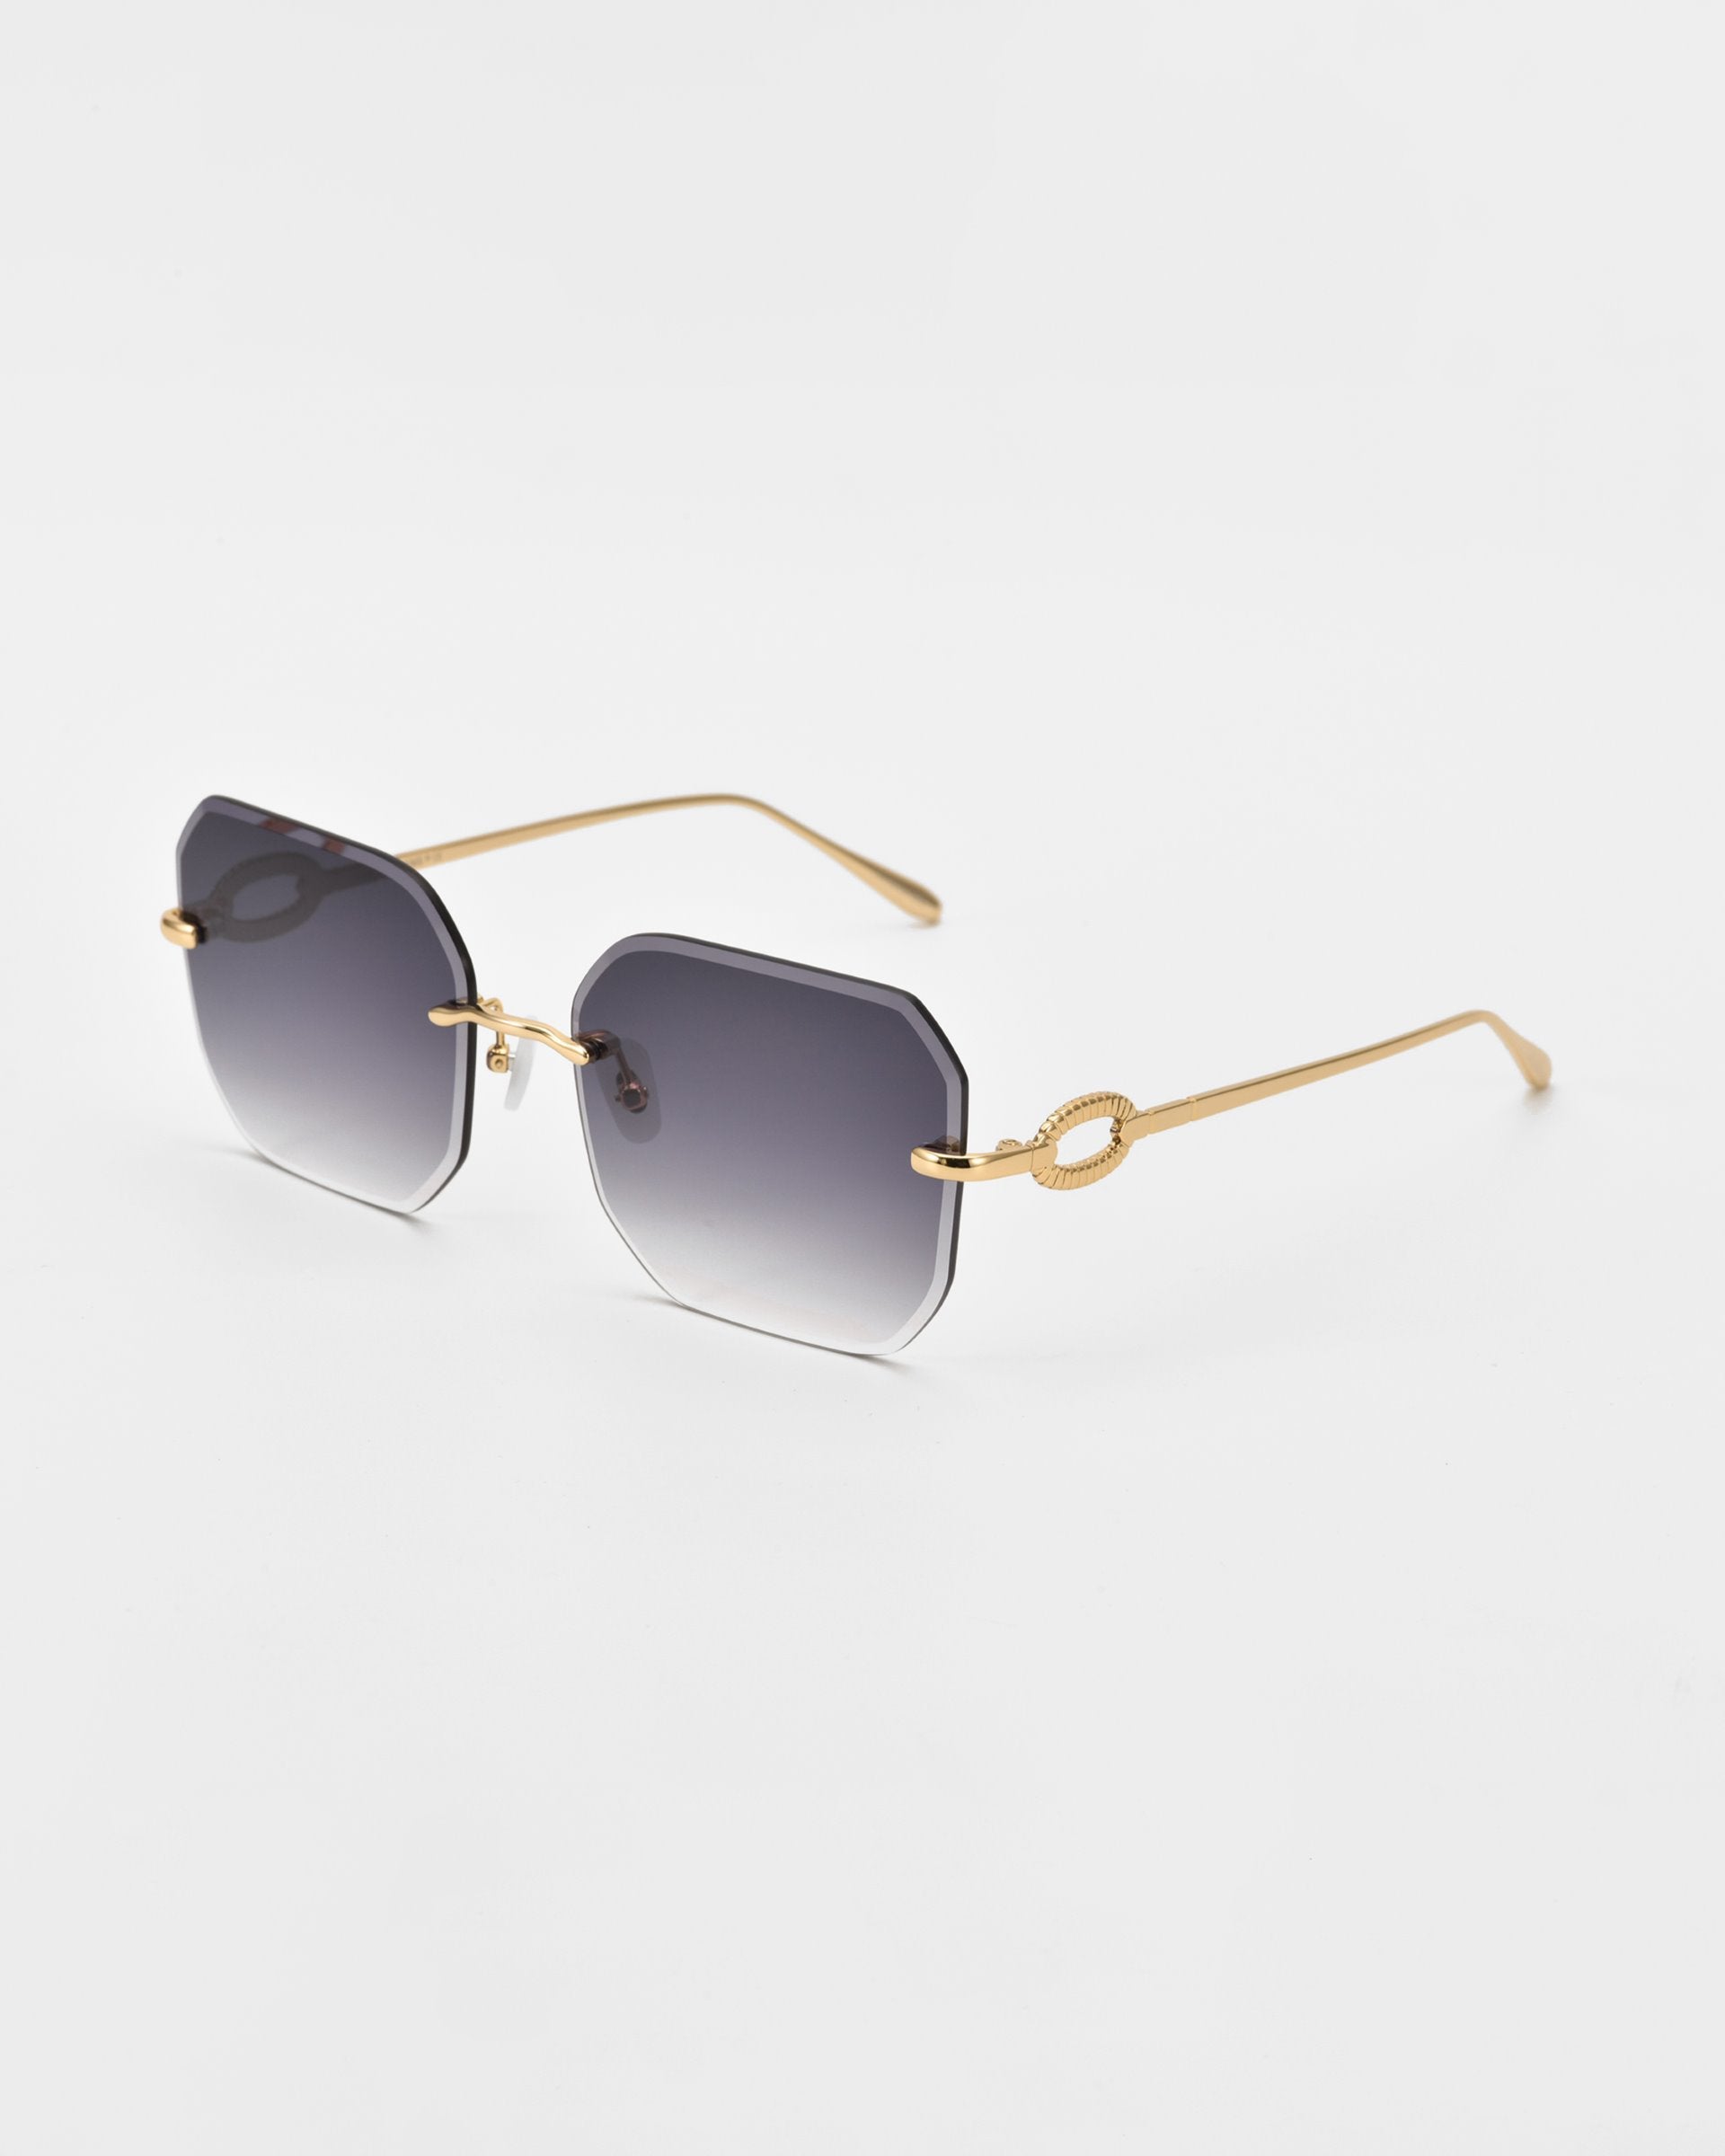 The Aria sunglasses by For Art's Sake® showcase stylish square, diamond-cut lenses with a gradient gray tint and thin gold arms. The arms feature a decorative loop detail near the hinges. Enhanced with jade-stone nose pads, these glasses are set against a plain white background.